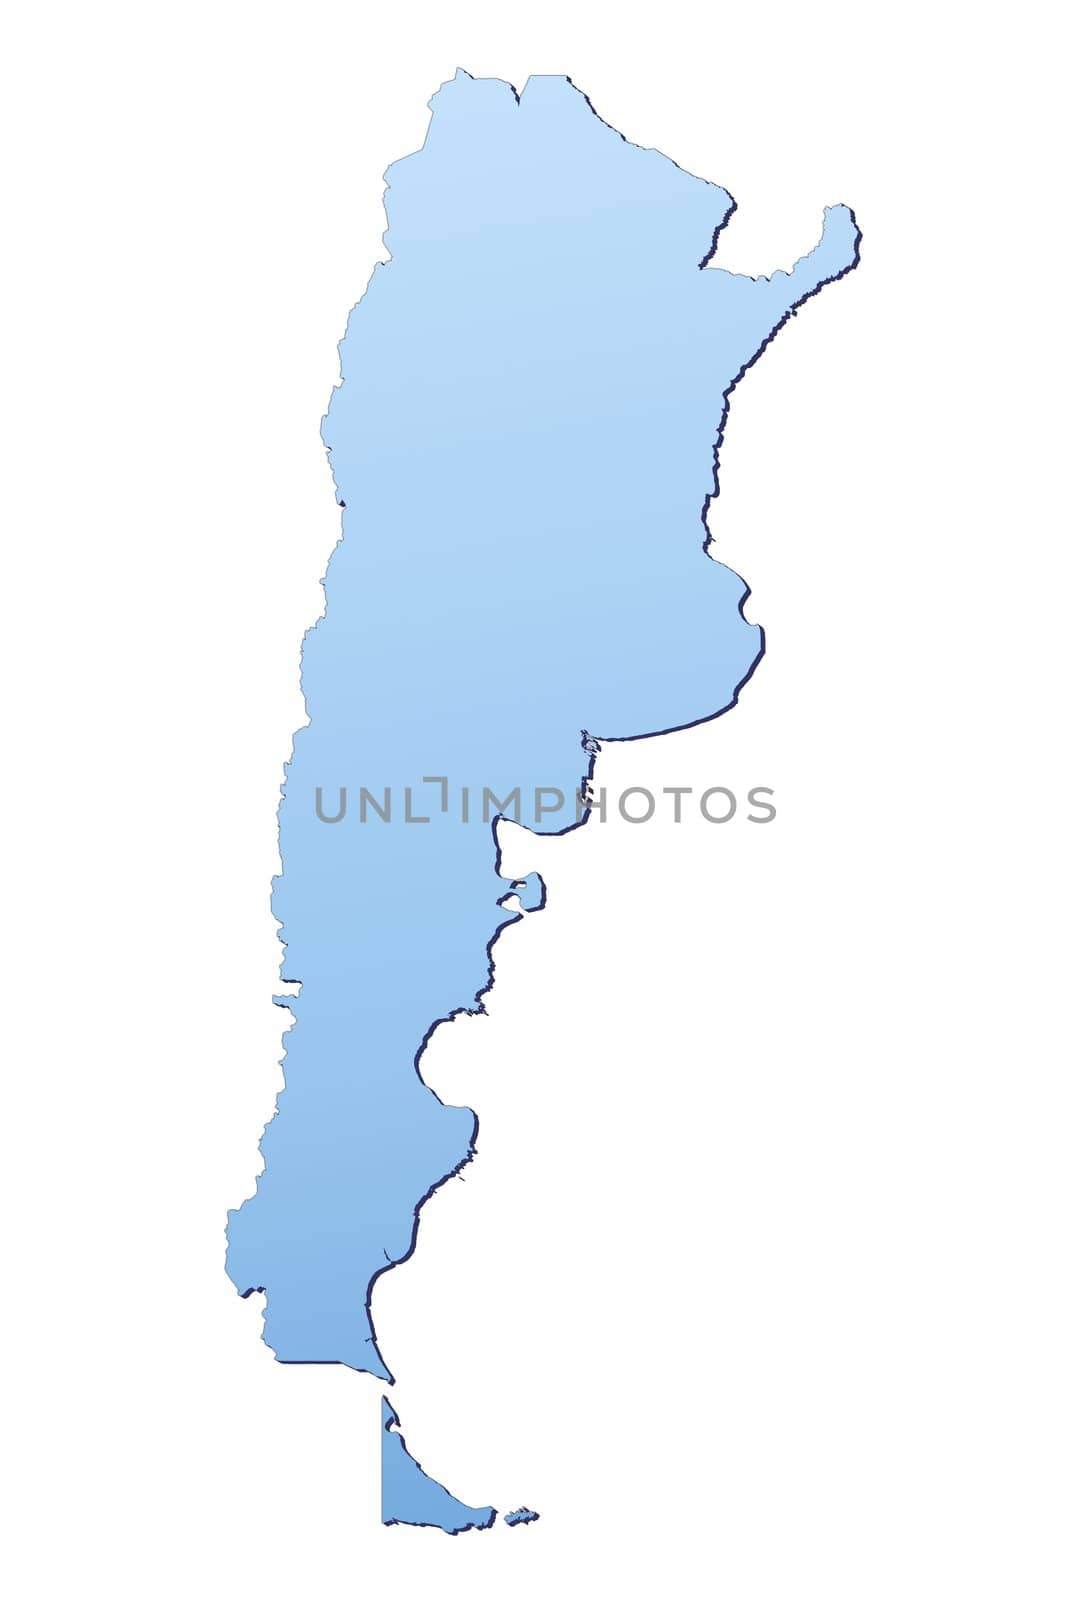 Argentina map by skvoor